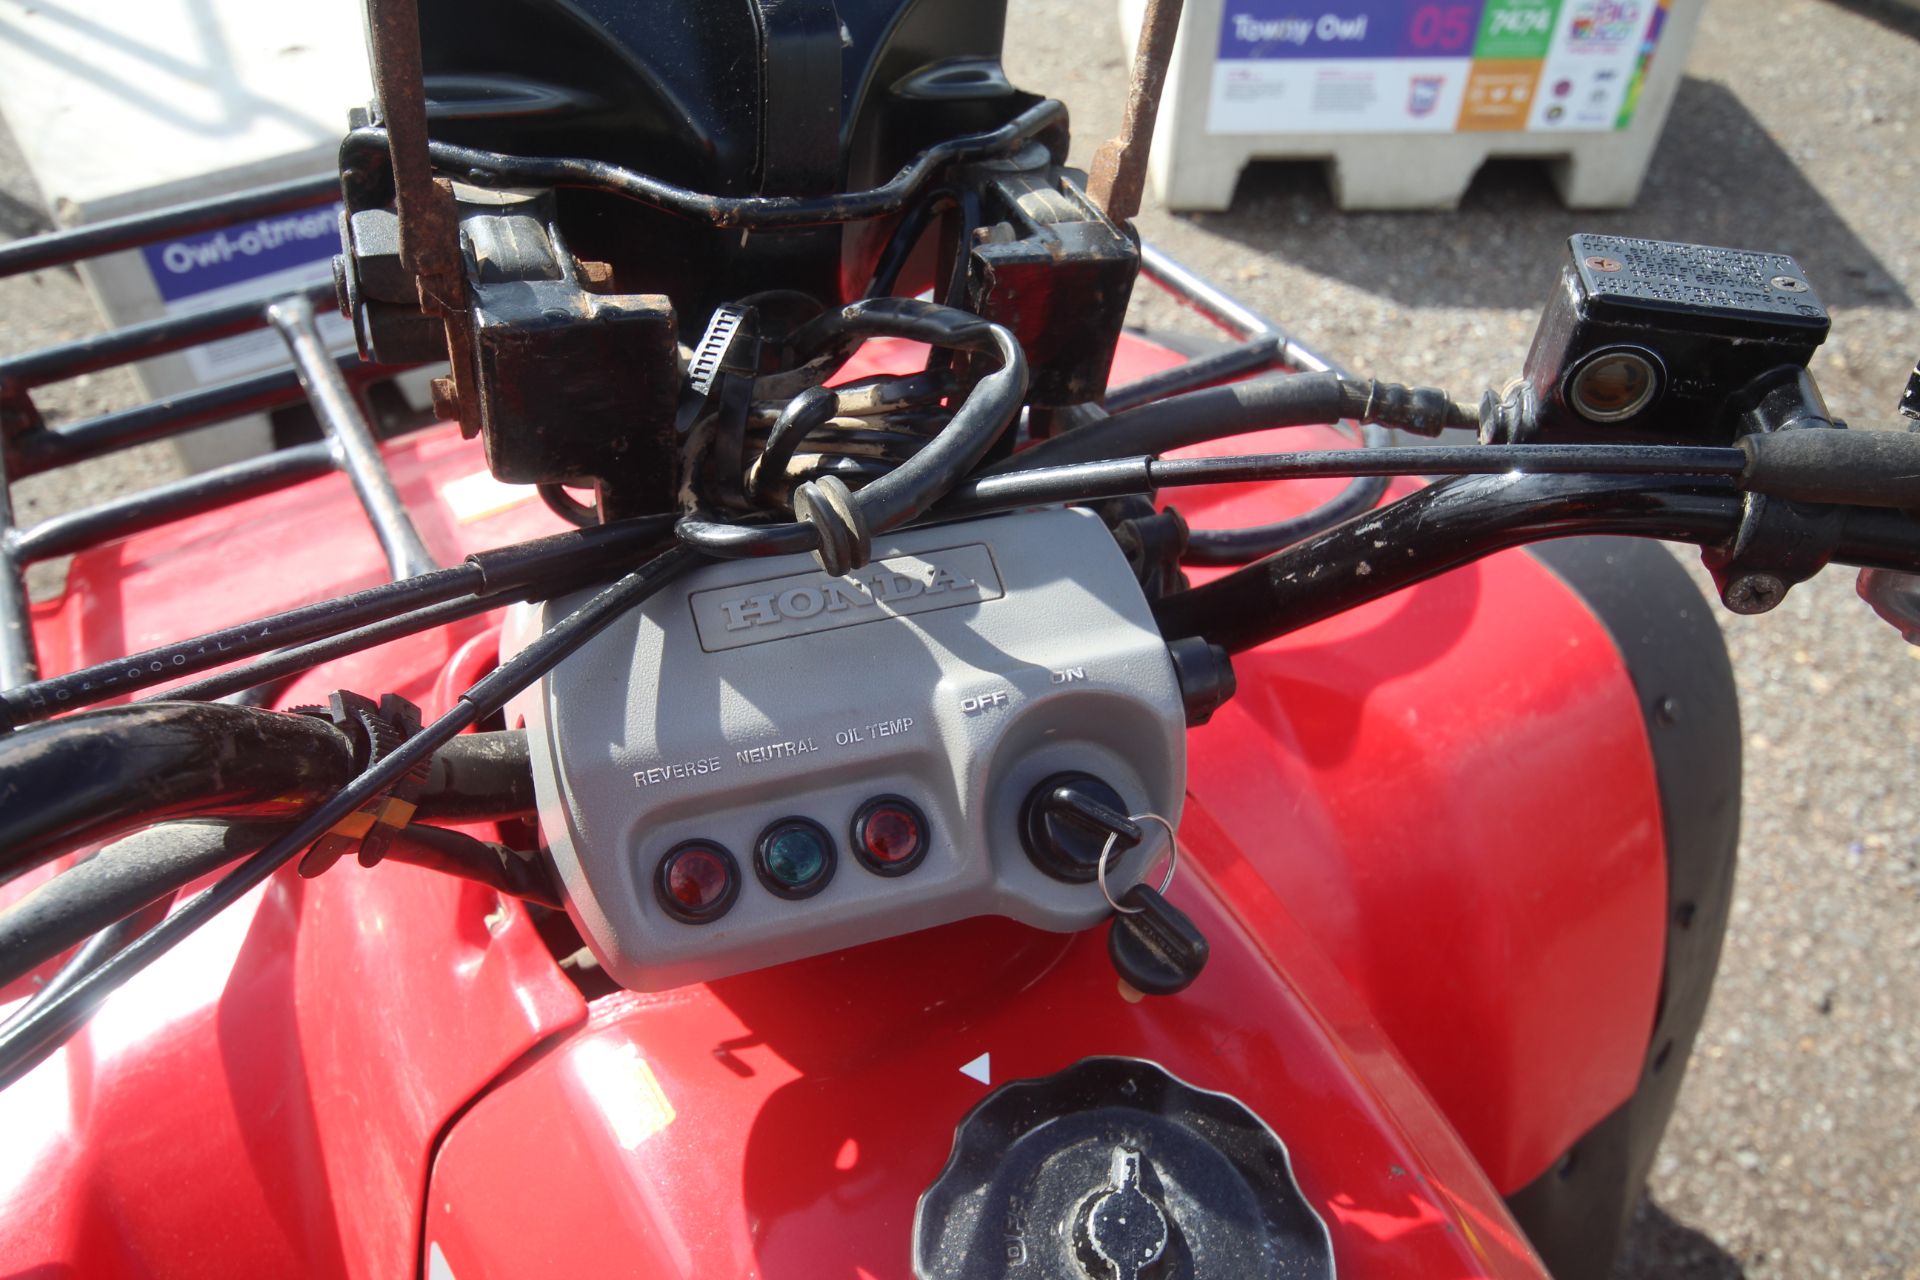 Honda Big Red 300 2WD quad bike. 1992. Owned from new. Key held. V - Image 11 of 24